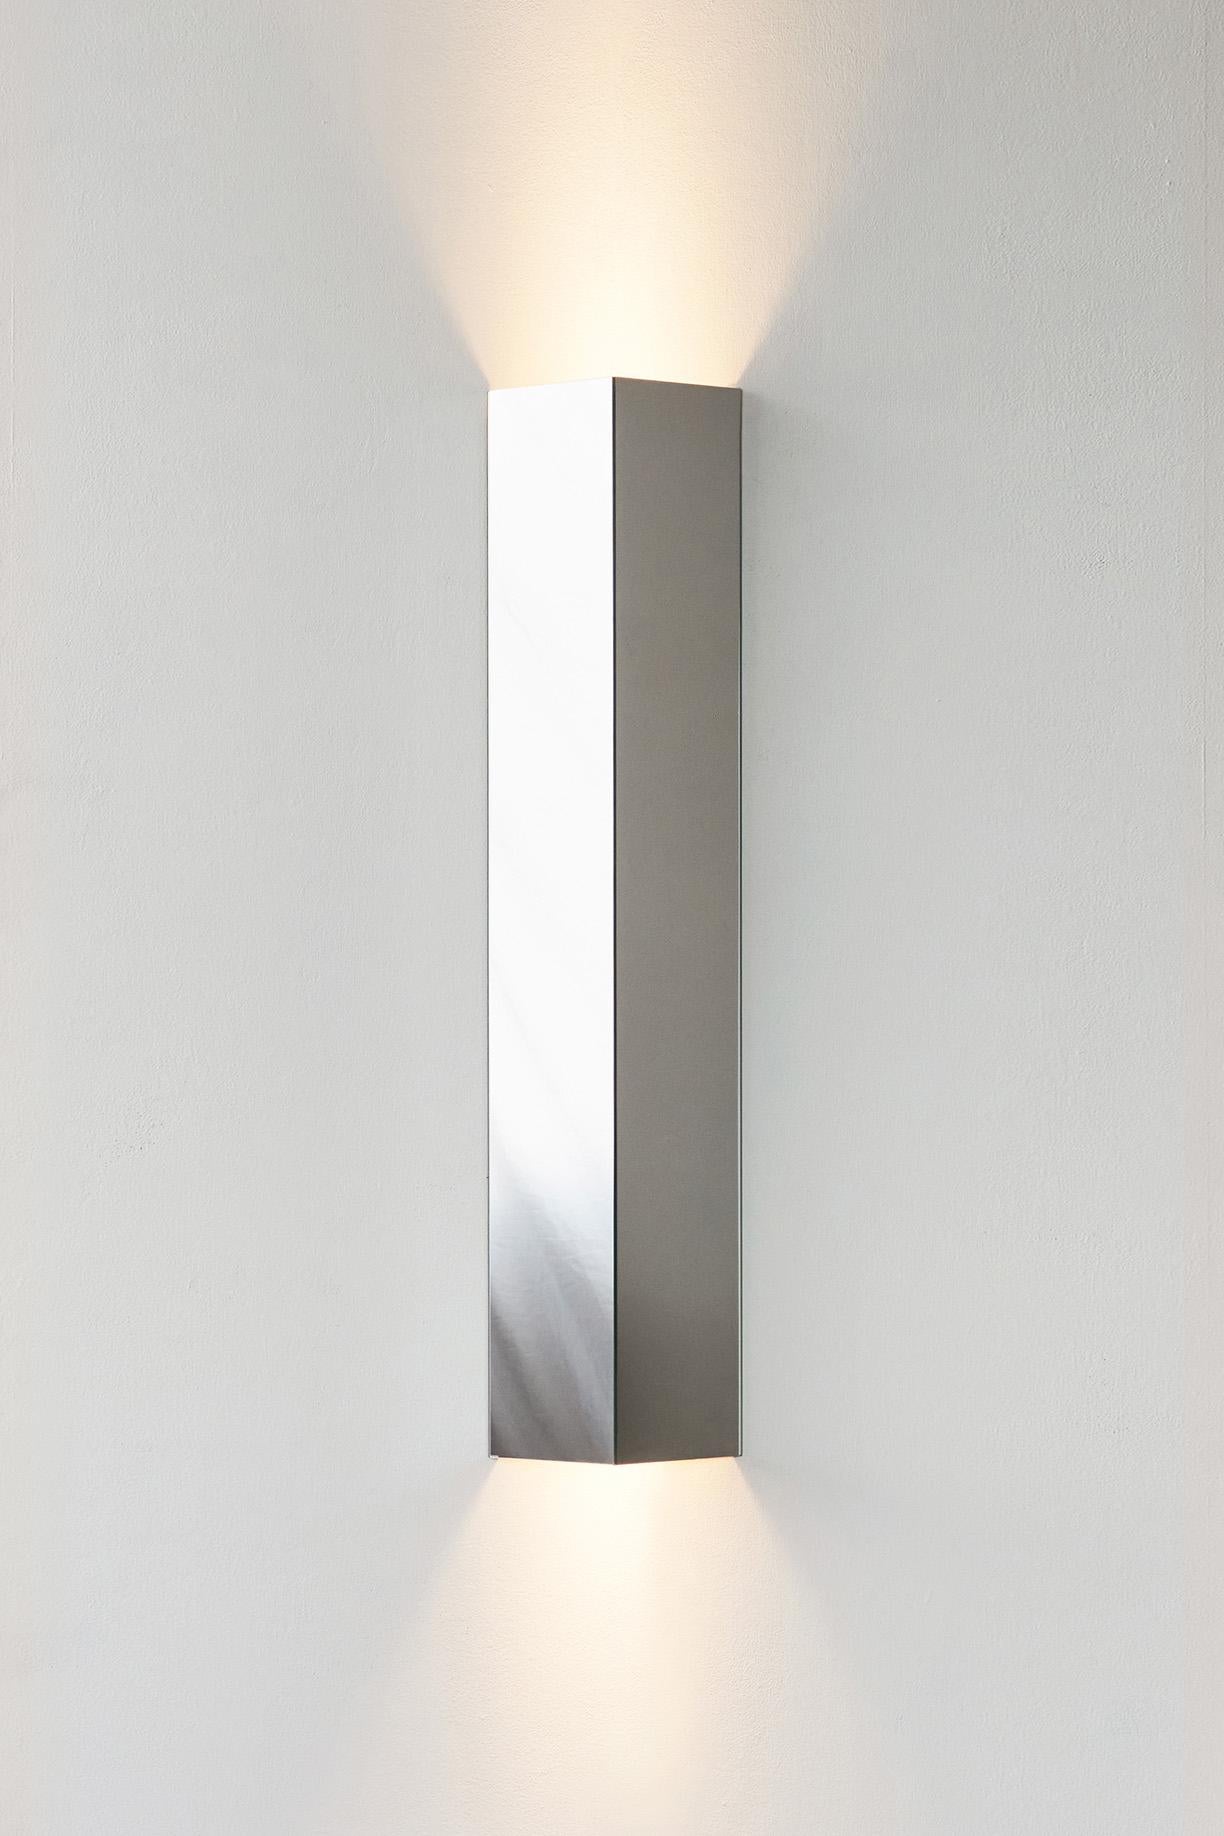 VIEW Shard Wall Sconce is part of a five-piece collection of sculptural glass and mirror furniture seeking to bring interactive views into objects and furniture.

The collection represents the belief that objects have the capacity to shift